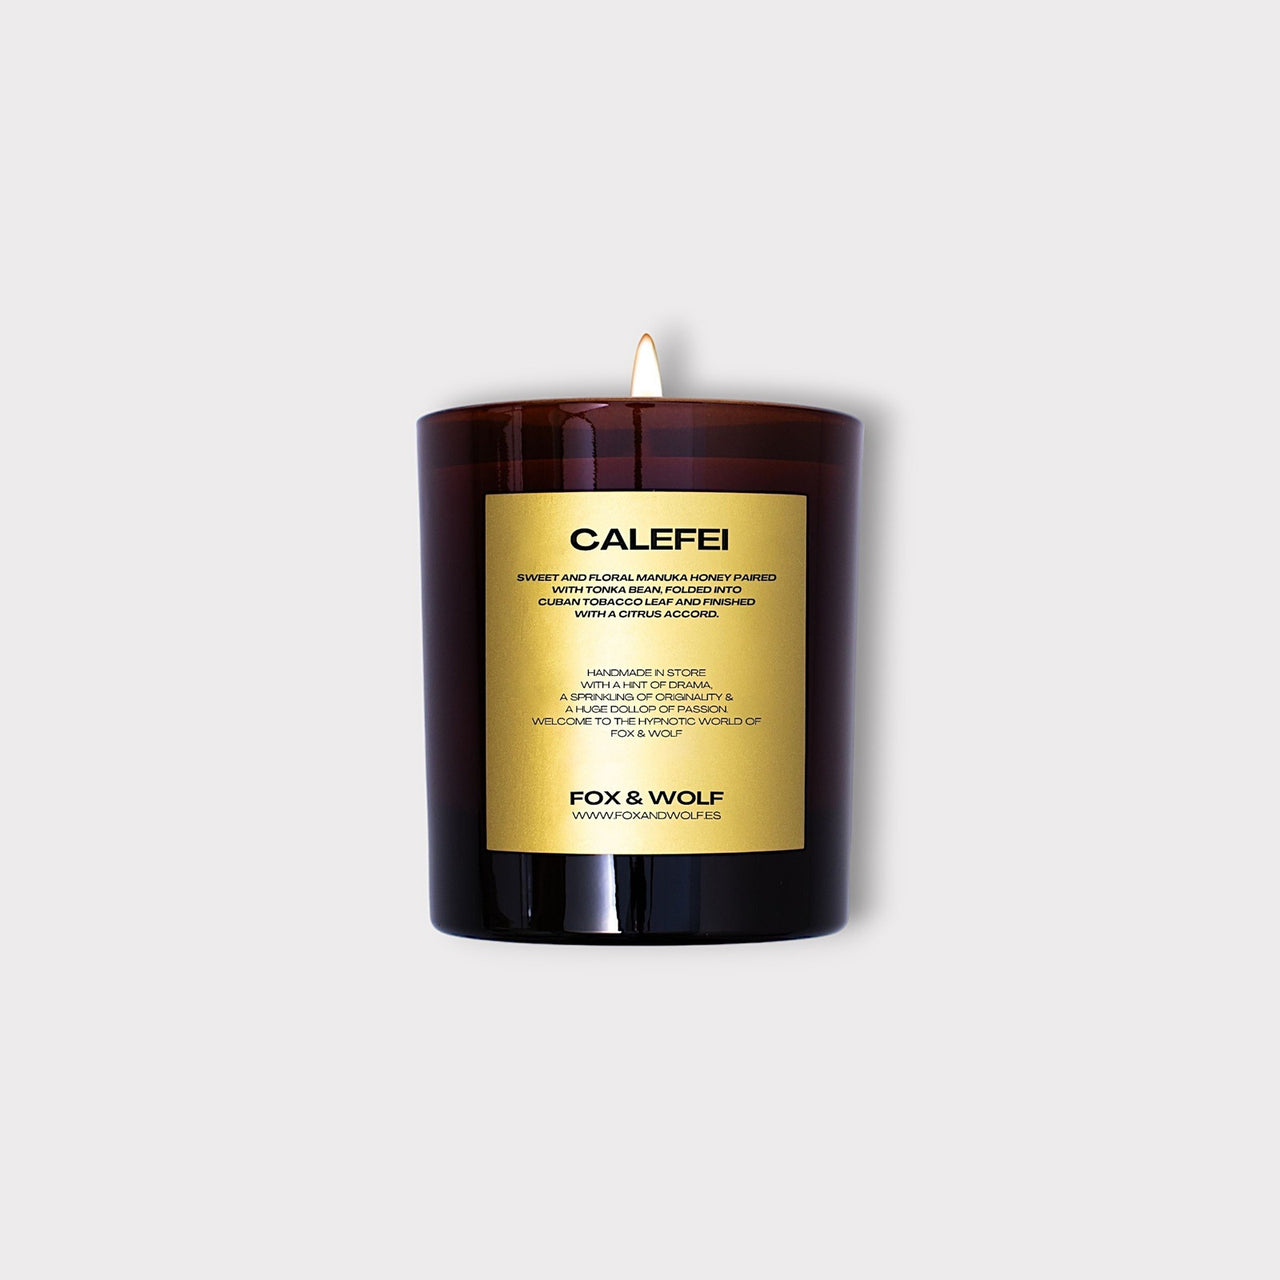 (300 G) CALEFEI SCENTED CANDLE